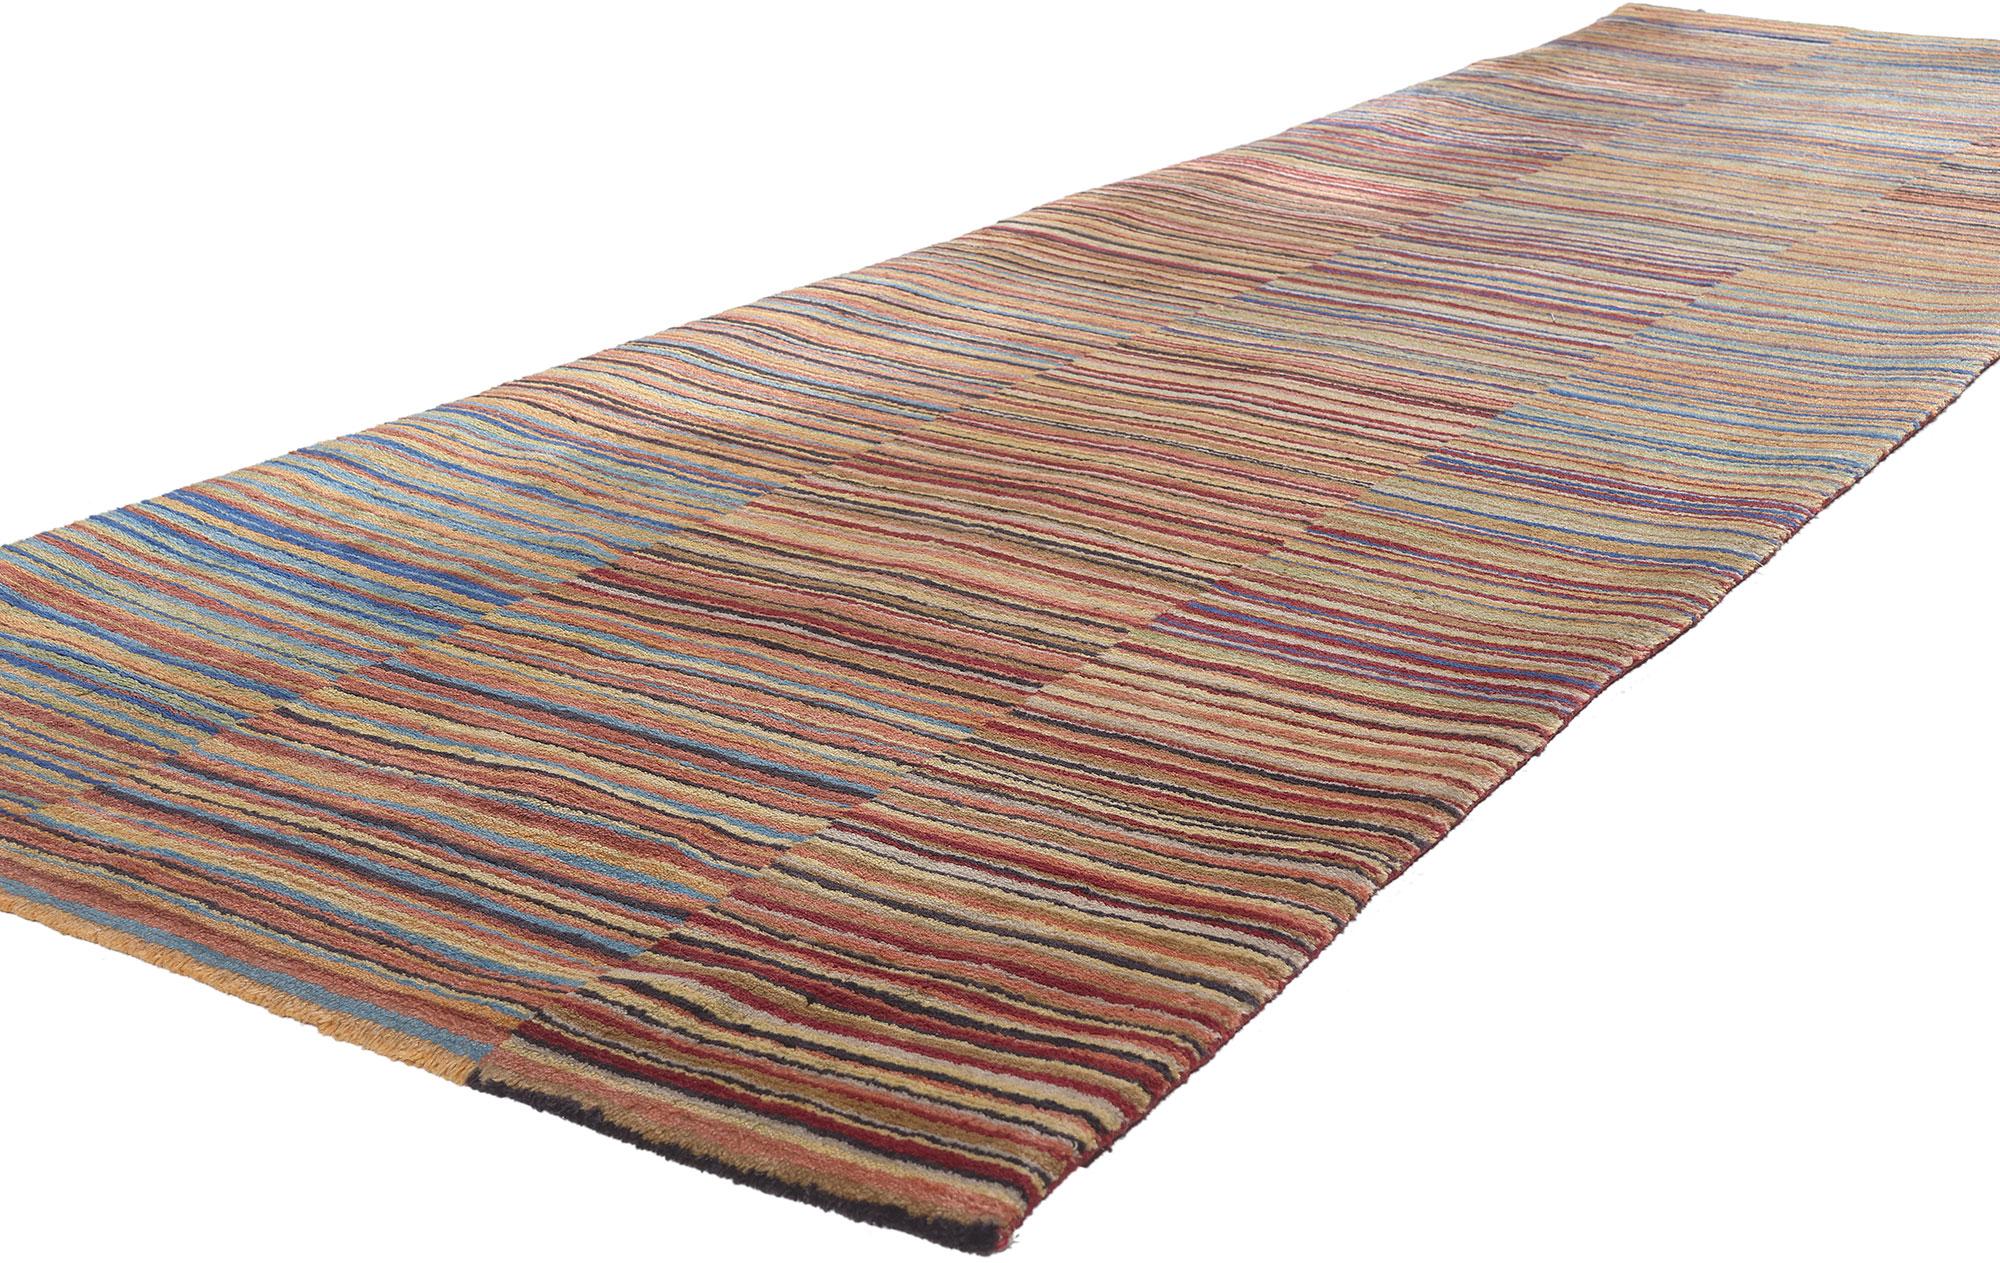 78531 Colorful Striped Tibetan Runner, 03'00 x 09'08. 
Emanating classic style with incredible detail and texture, this colorful Tibetan runner is a captivating vision of woven beauty. The show-stopping striped pattern and full spectrum of happy